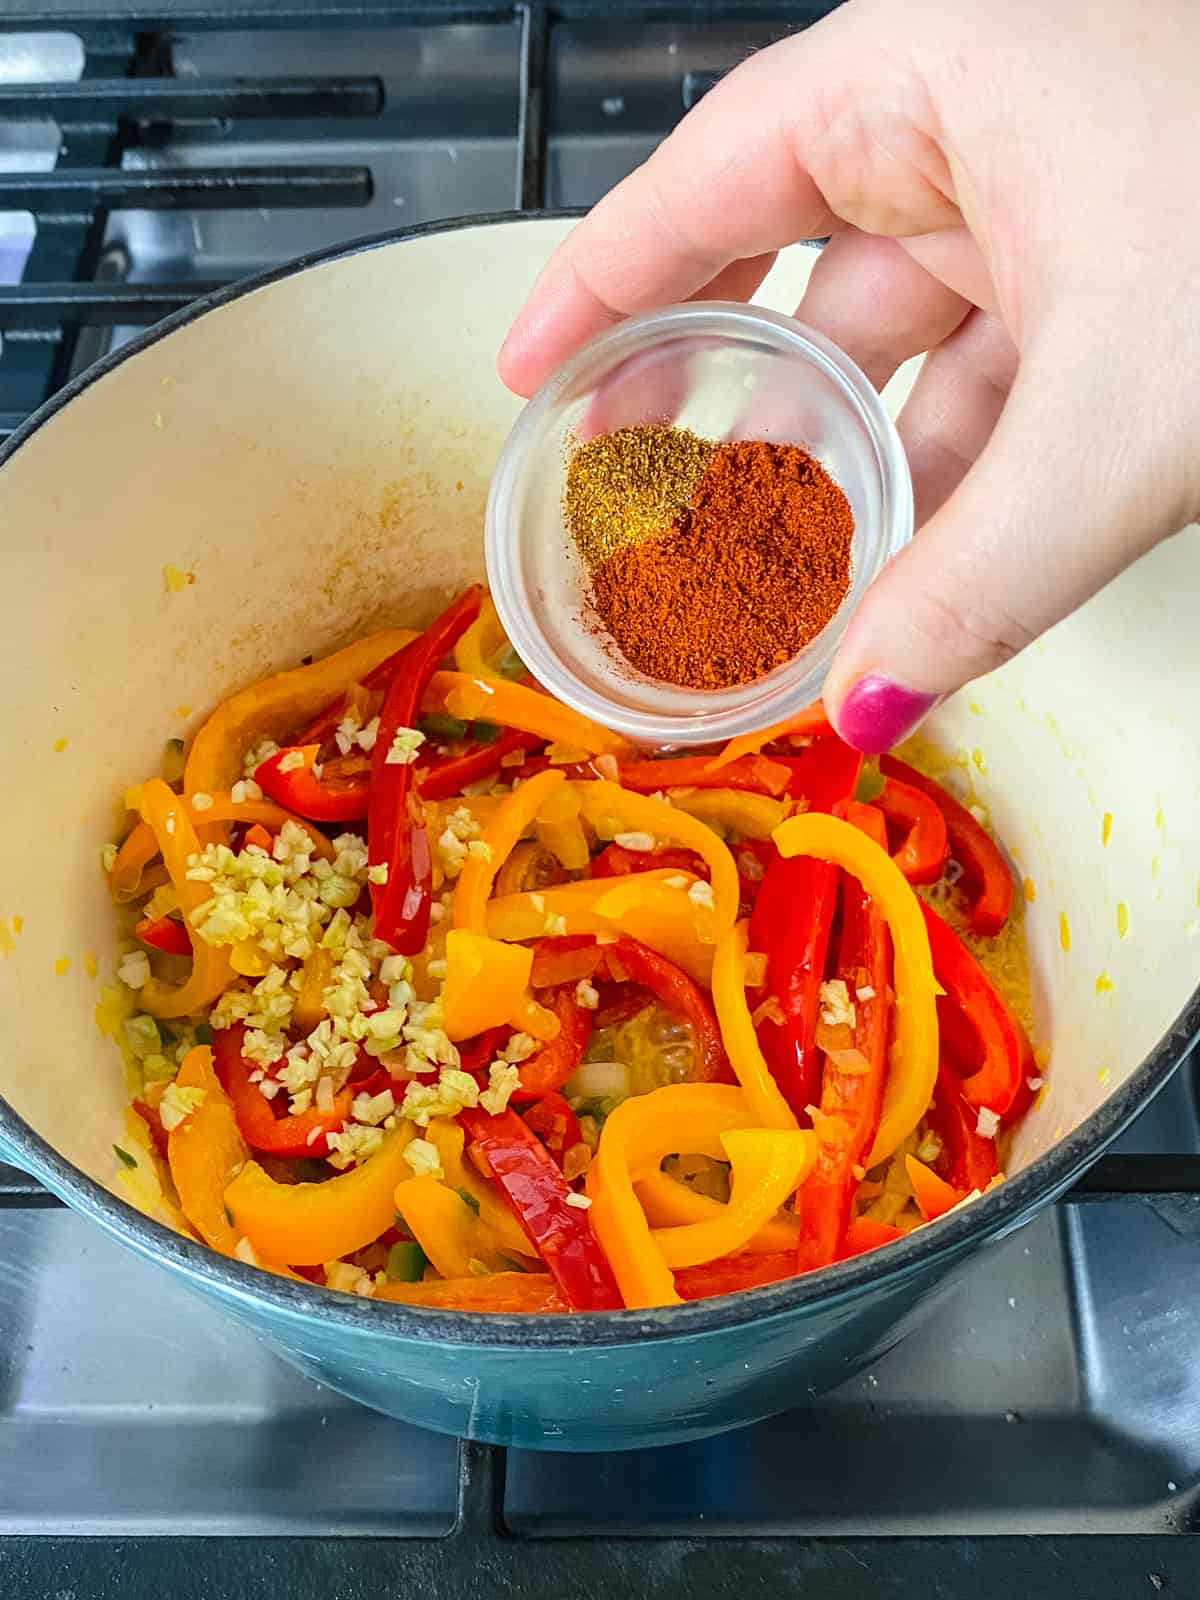 Add the chopped garlic, paprika and cayenne to the sautéed bell peppers and stir together.